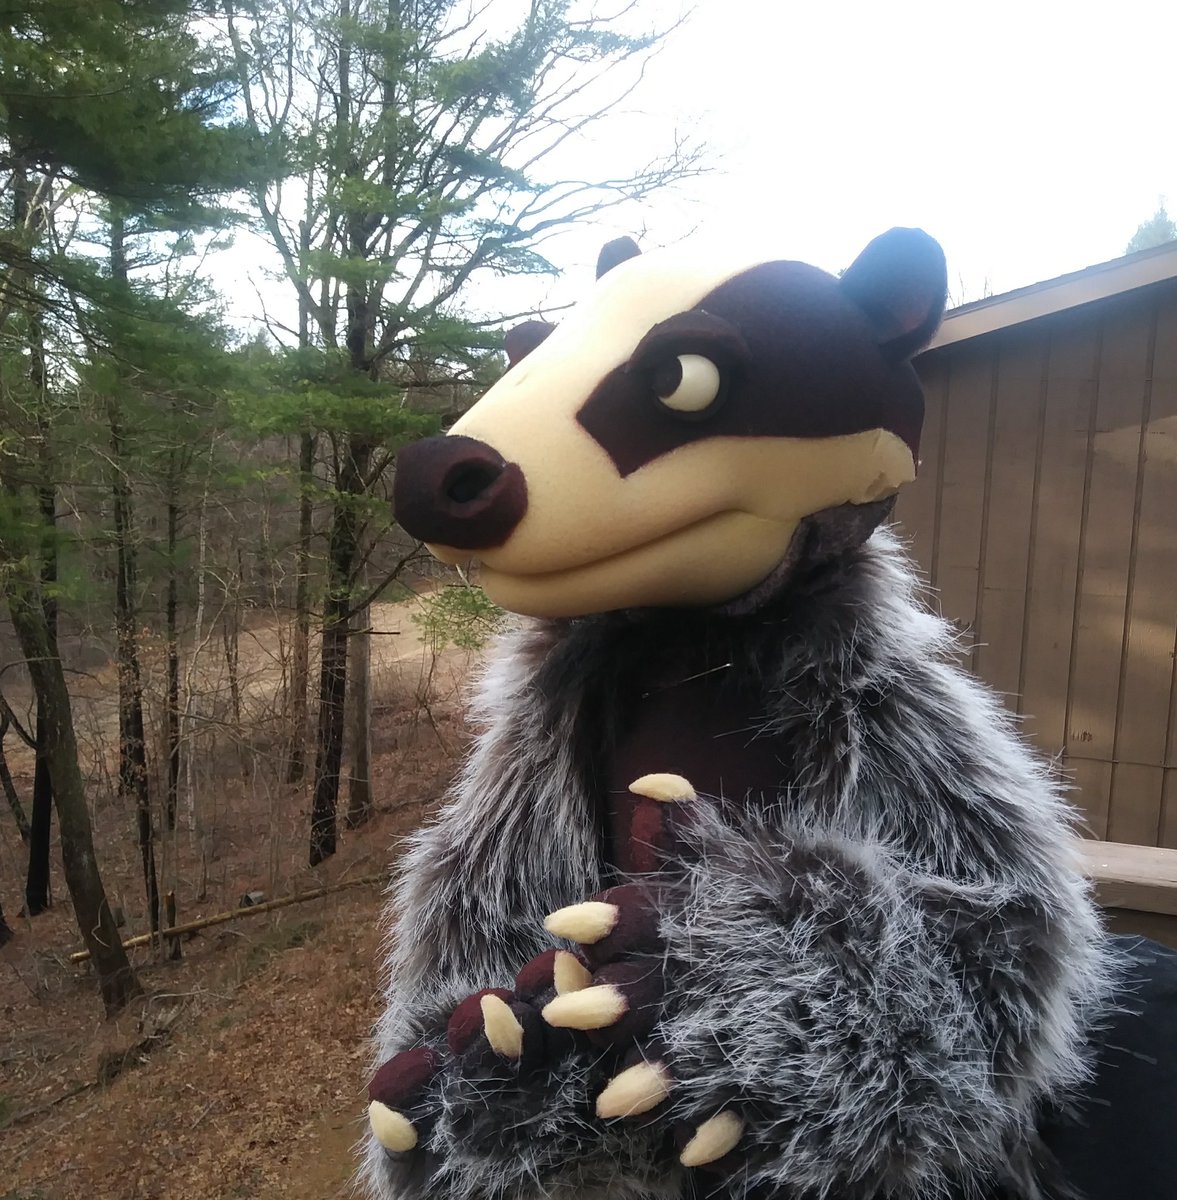 Hey it's  #WorldPuppetryDay !I'm a puppeteer, puppet maker, and am currently finishing my MFA project in isolation. I hope to bring some puppet goodness to a crazy time. I'm working on a puppet program pitch for a program focusing on gardening, foraging, and cooking!